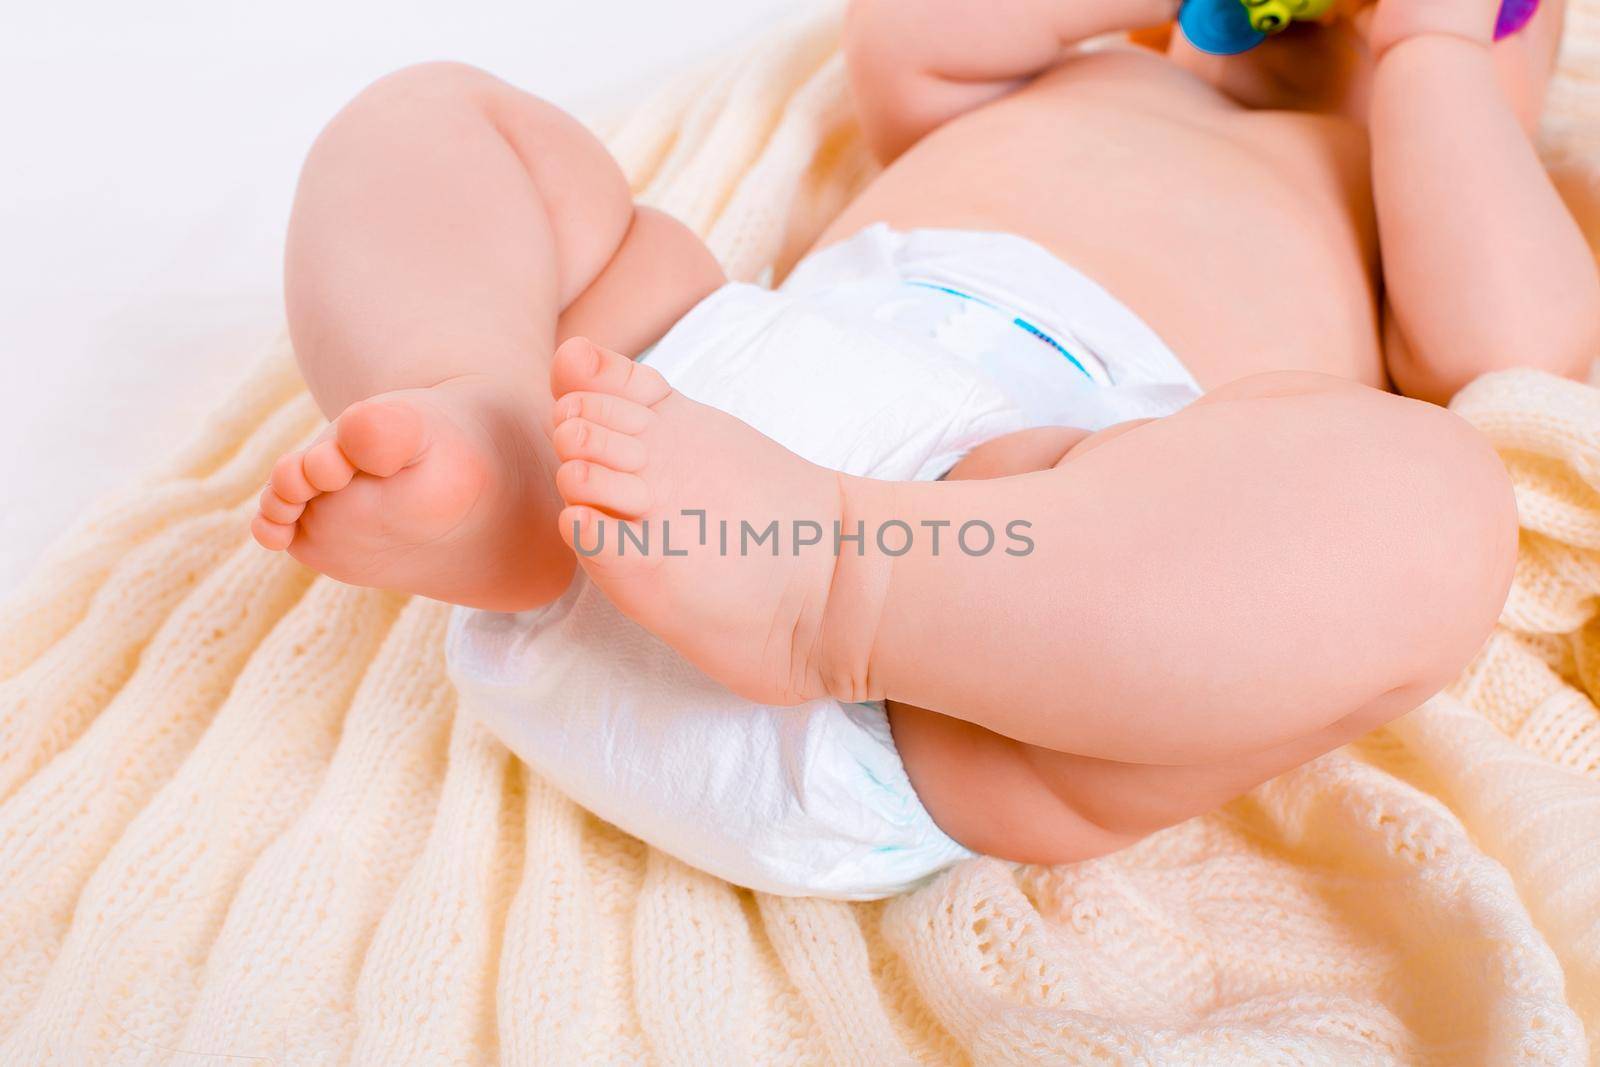 feet of a six months old baby wearing diapers lying in bed at home